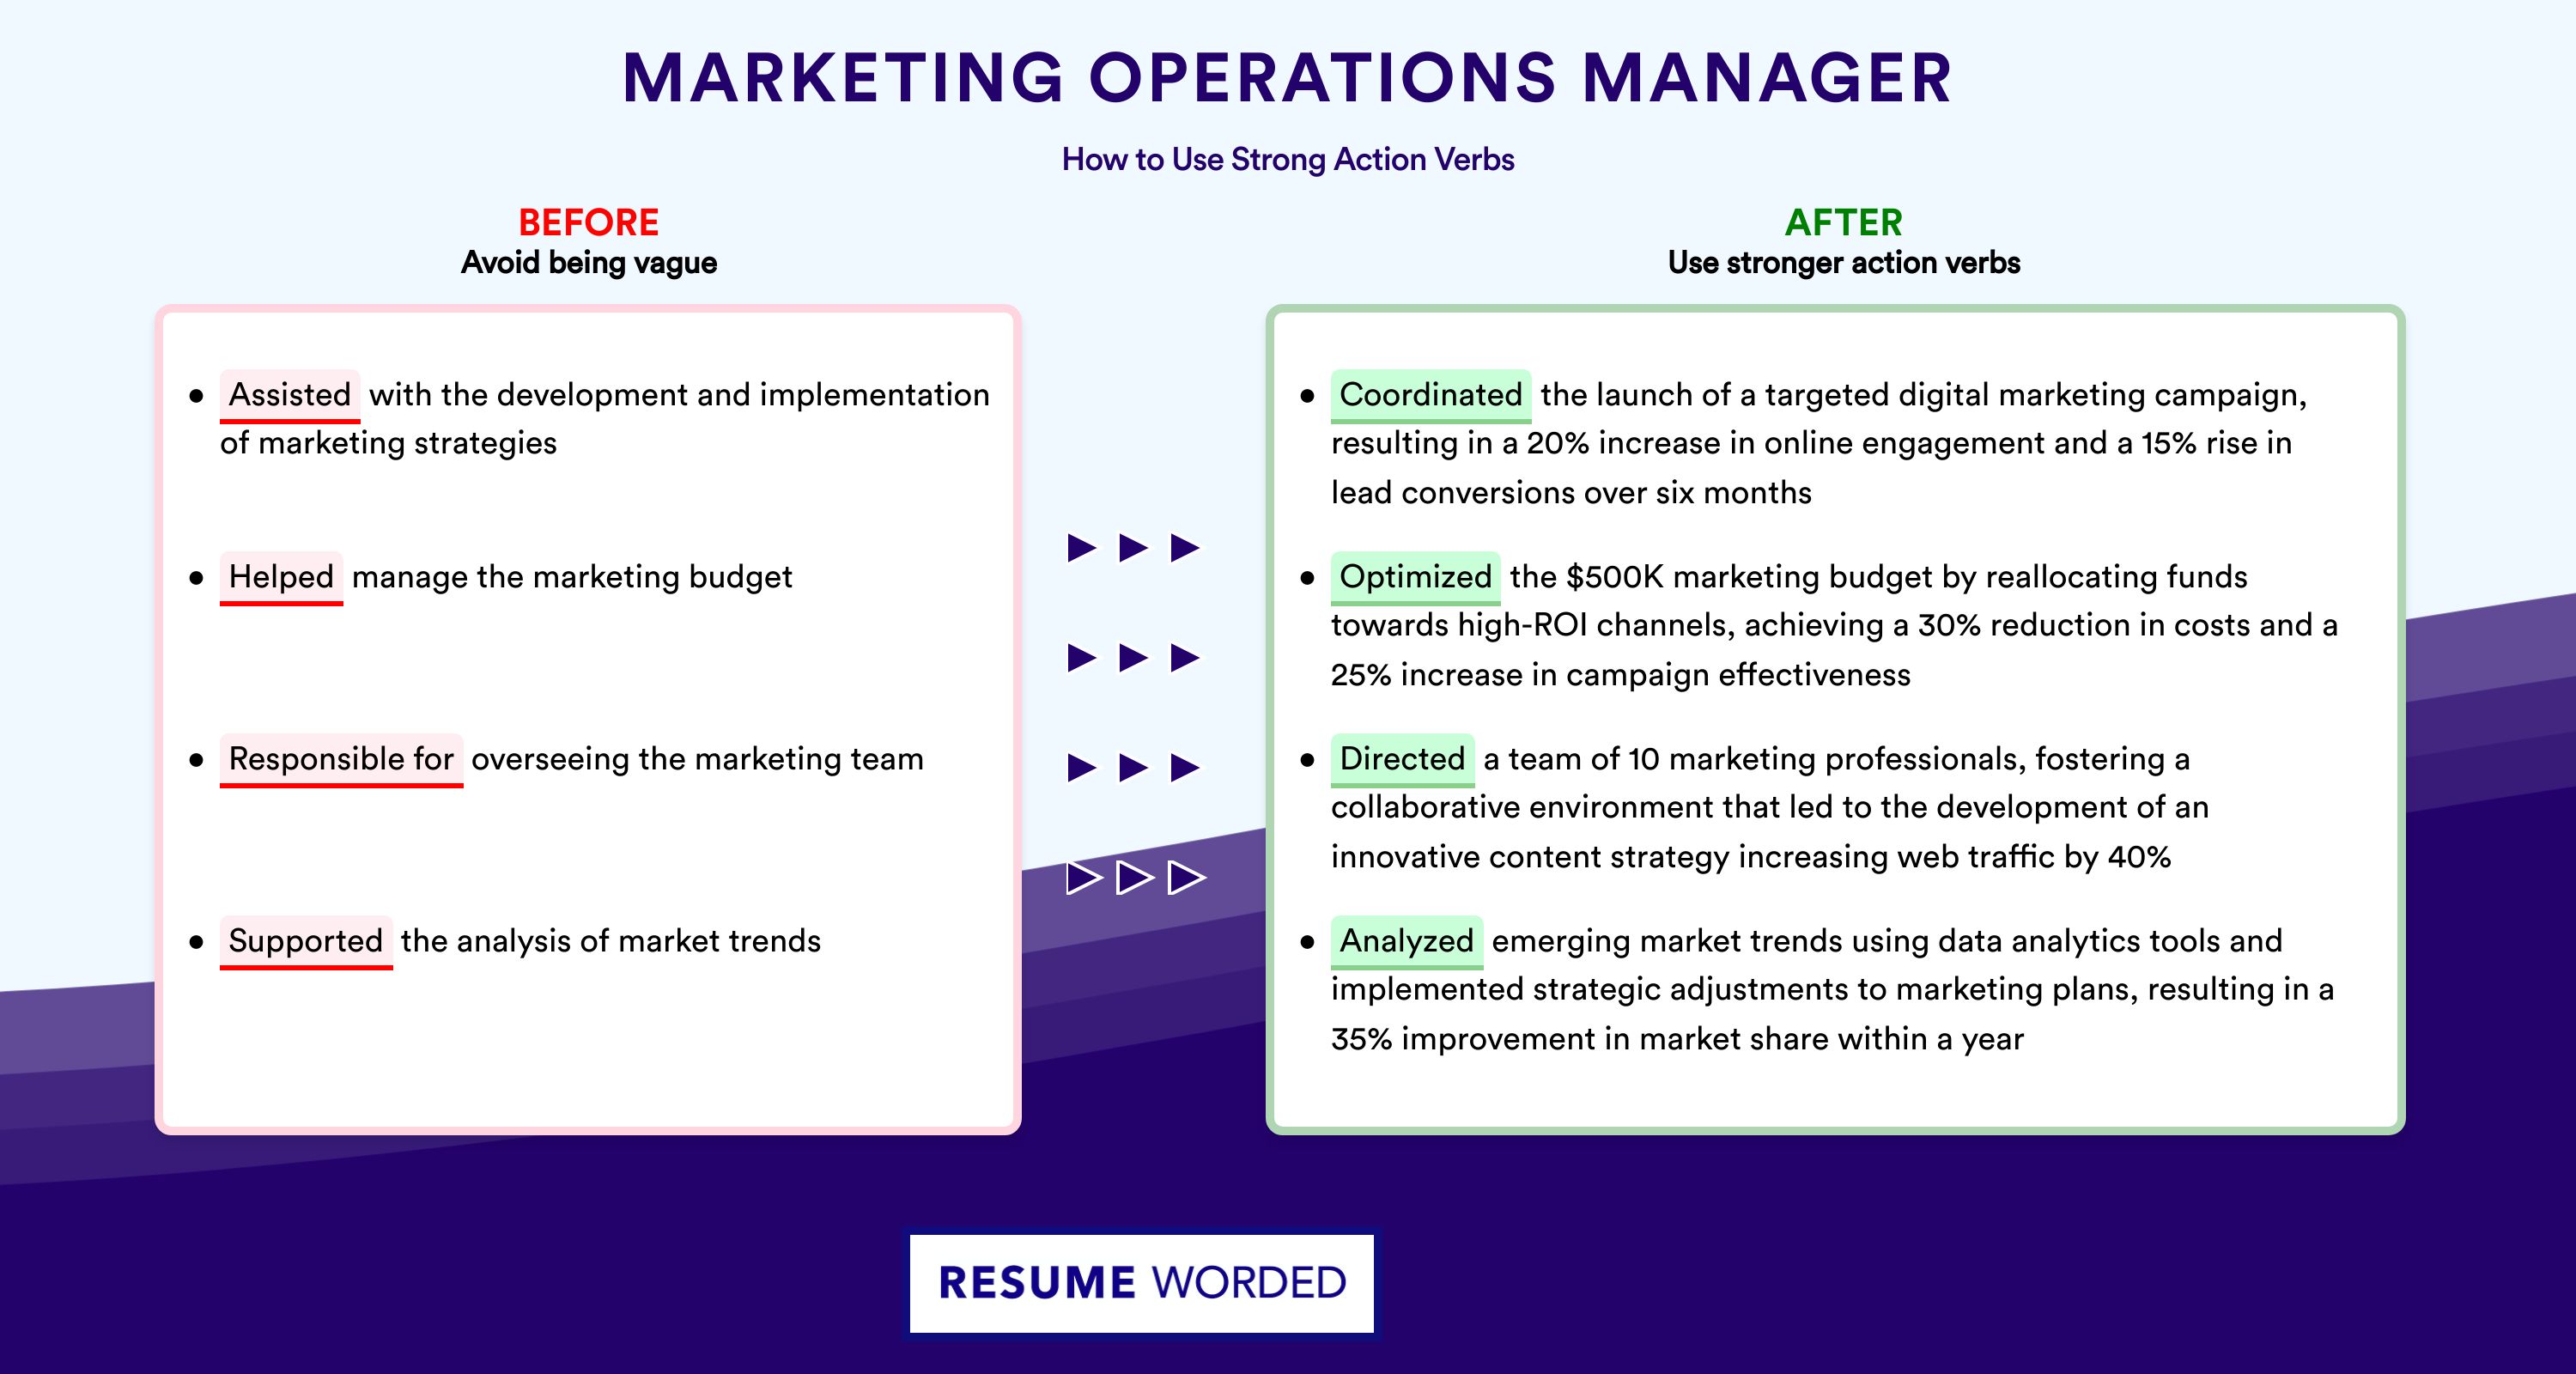 Action Verbs for Marketing Operations Manager